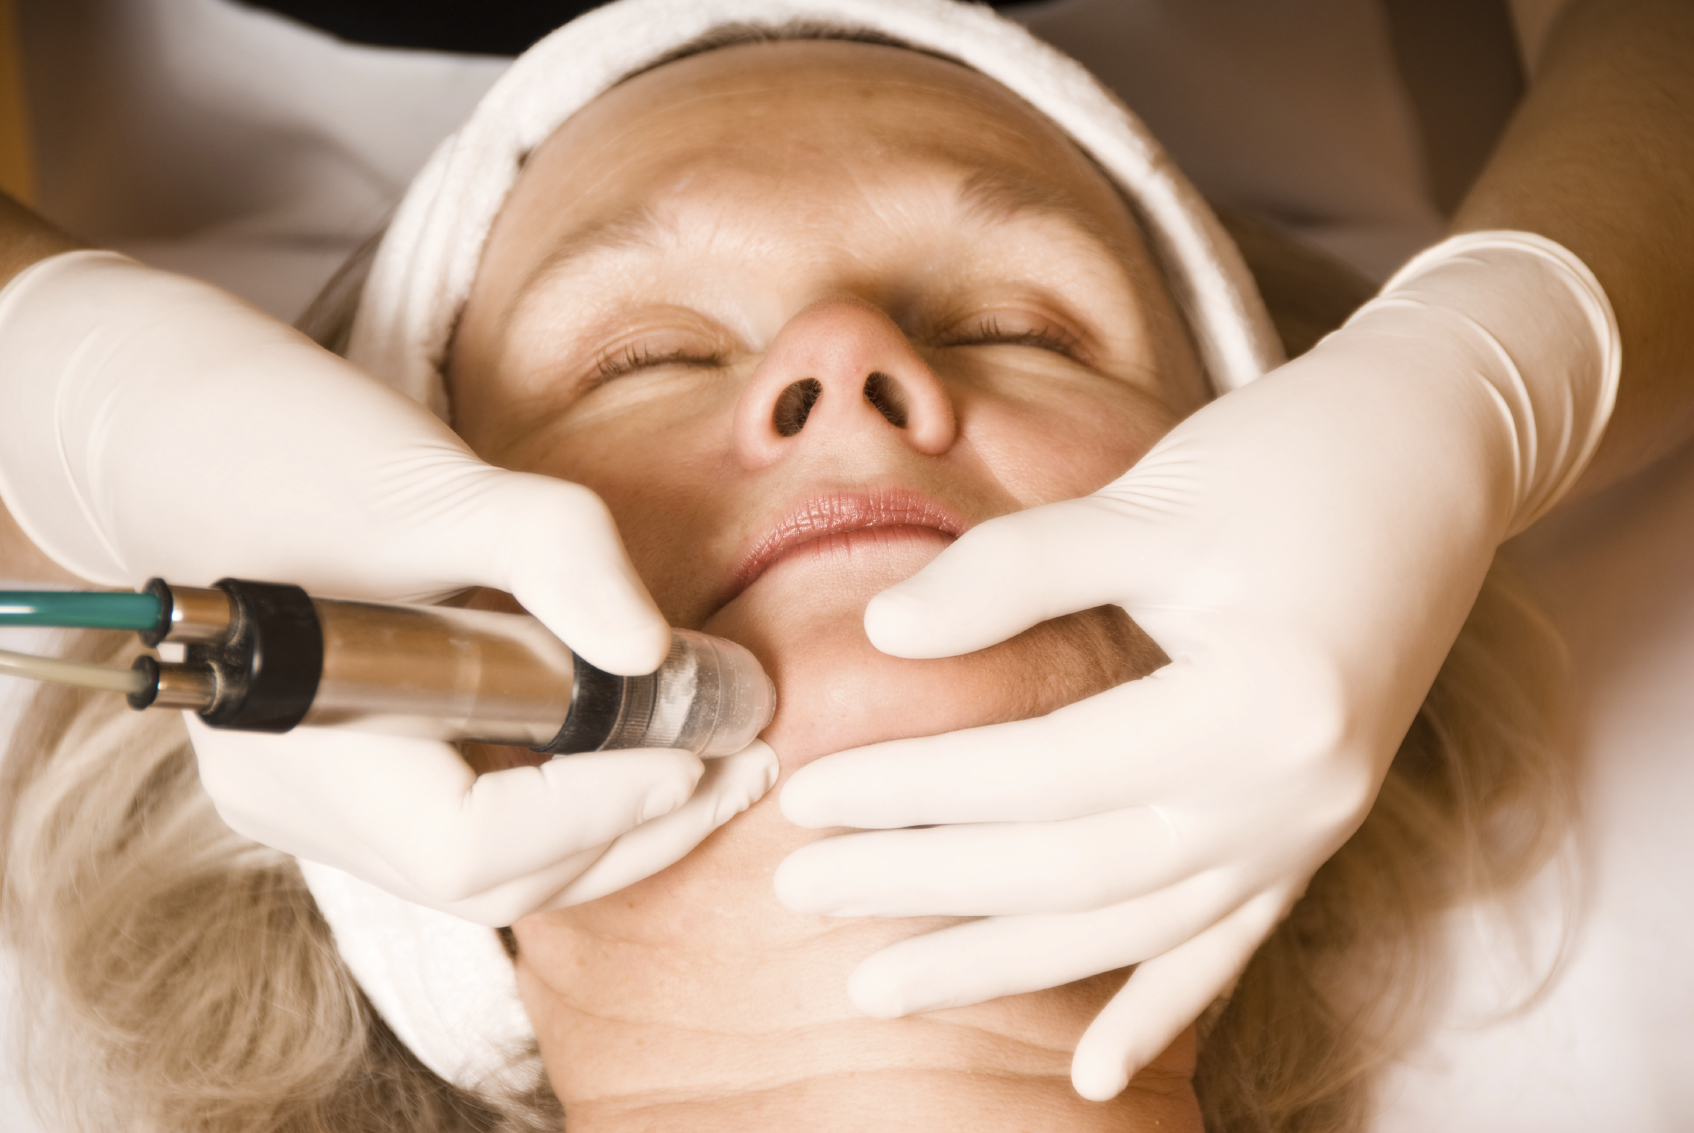 microdermabrasion protocol for estheticians